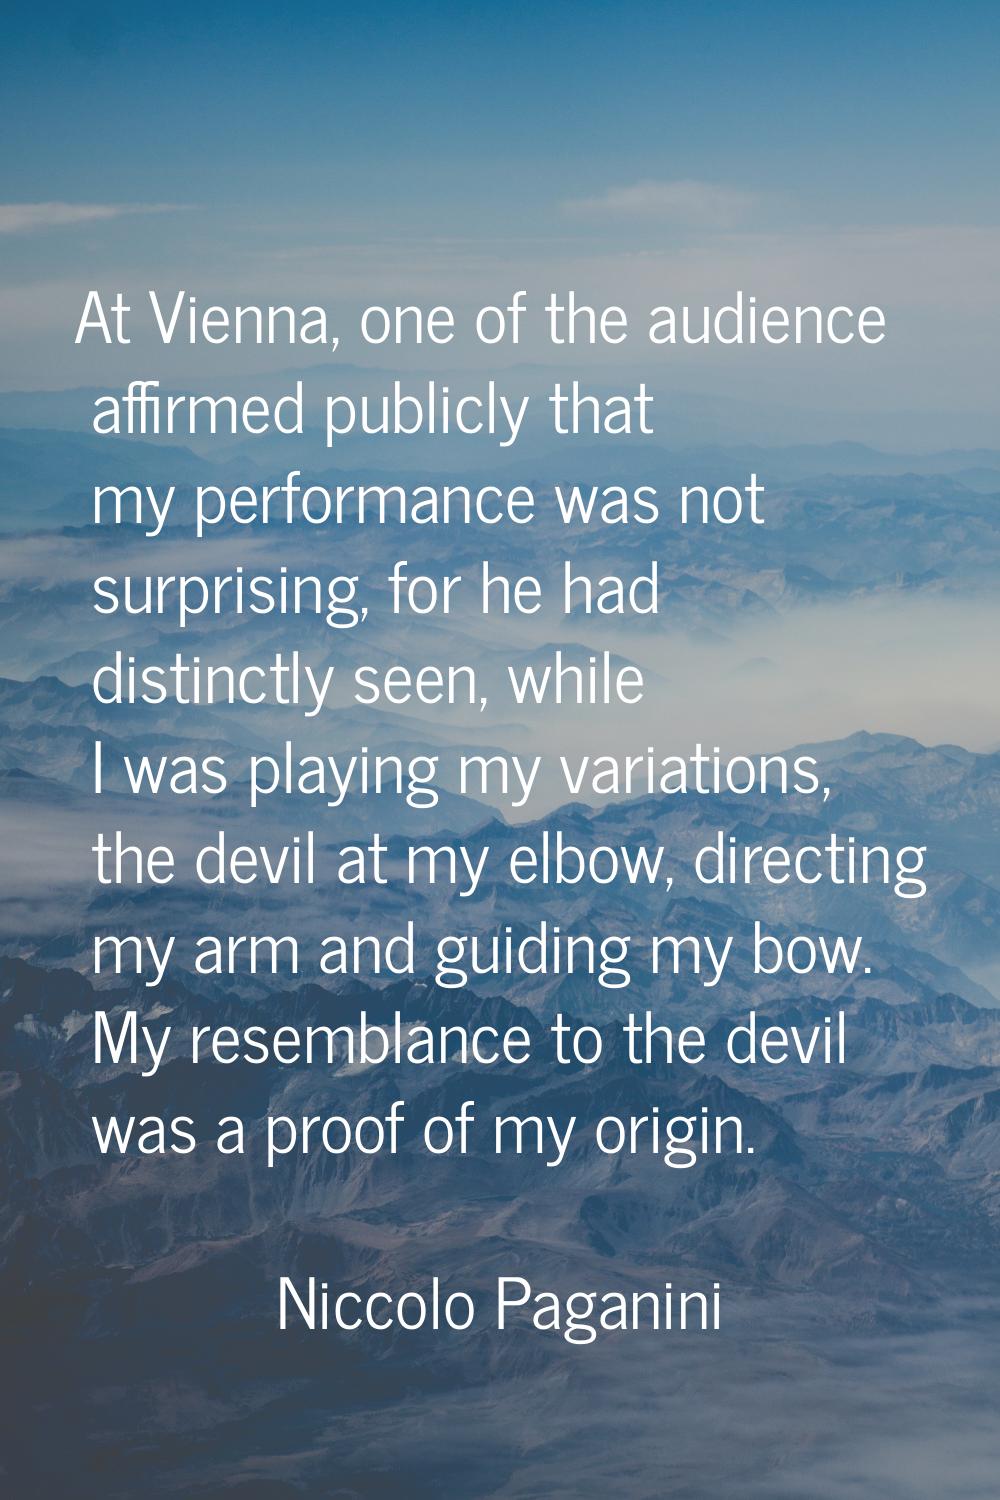 At Vienna, one of the audience affirmed publicly that my performance was not surprising, for he had